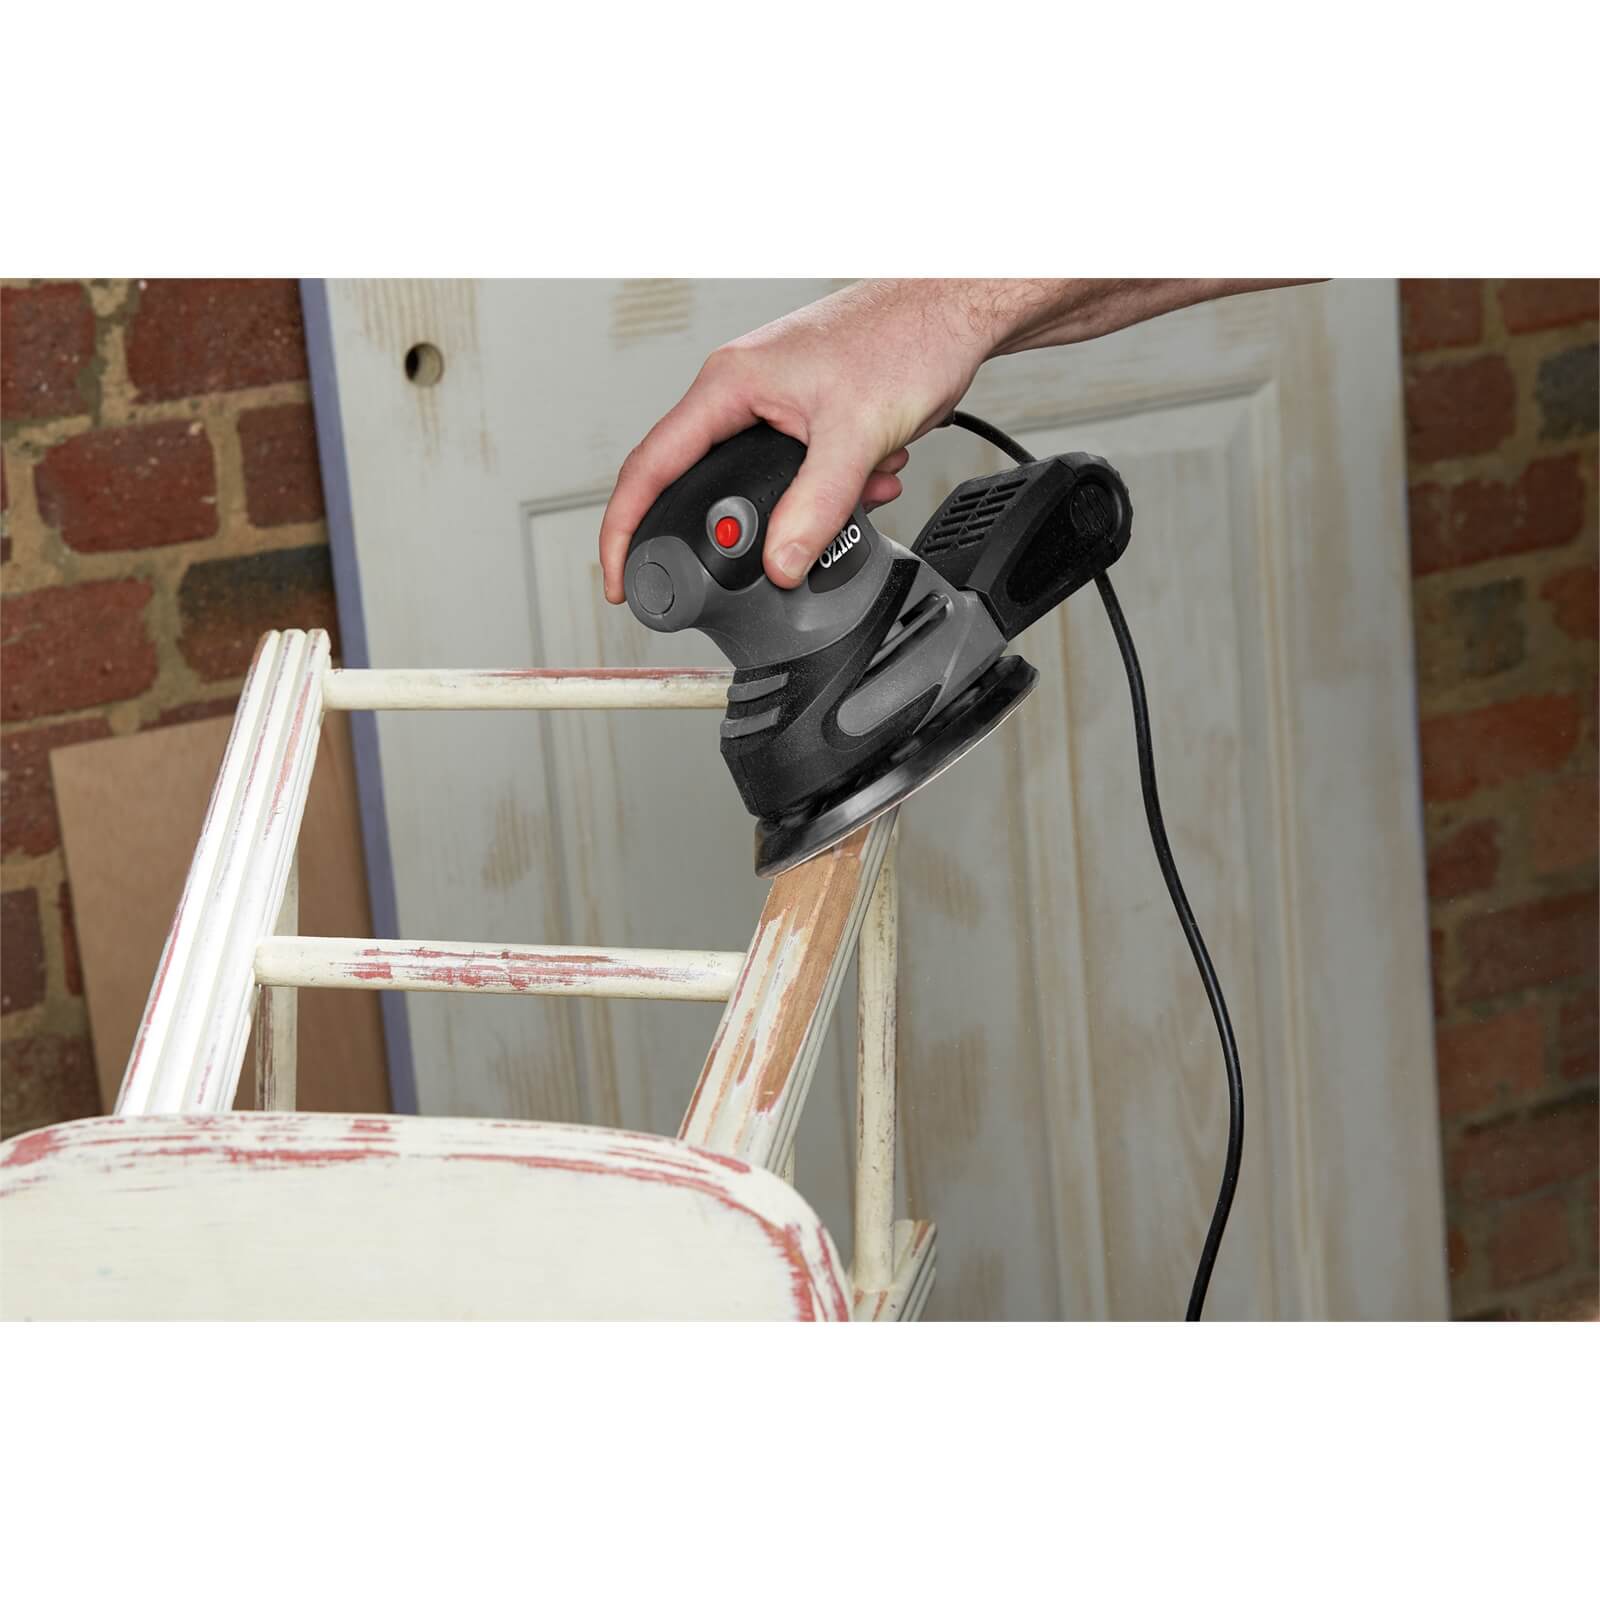 Ozito by Einhell 180W Detail Sander with 20 Sanding Sheets